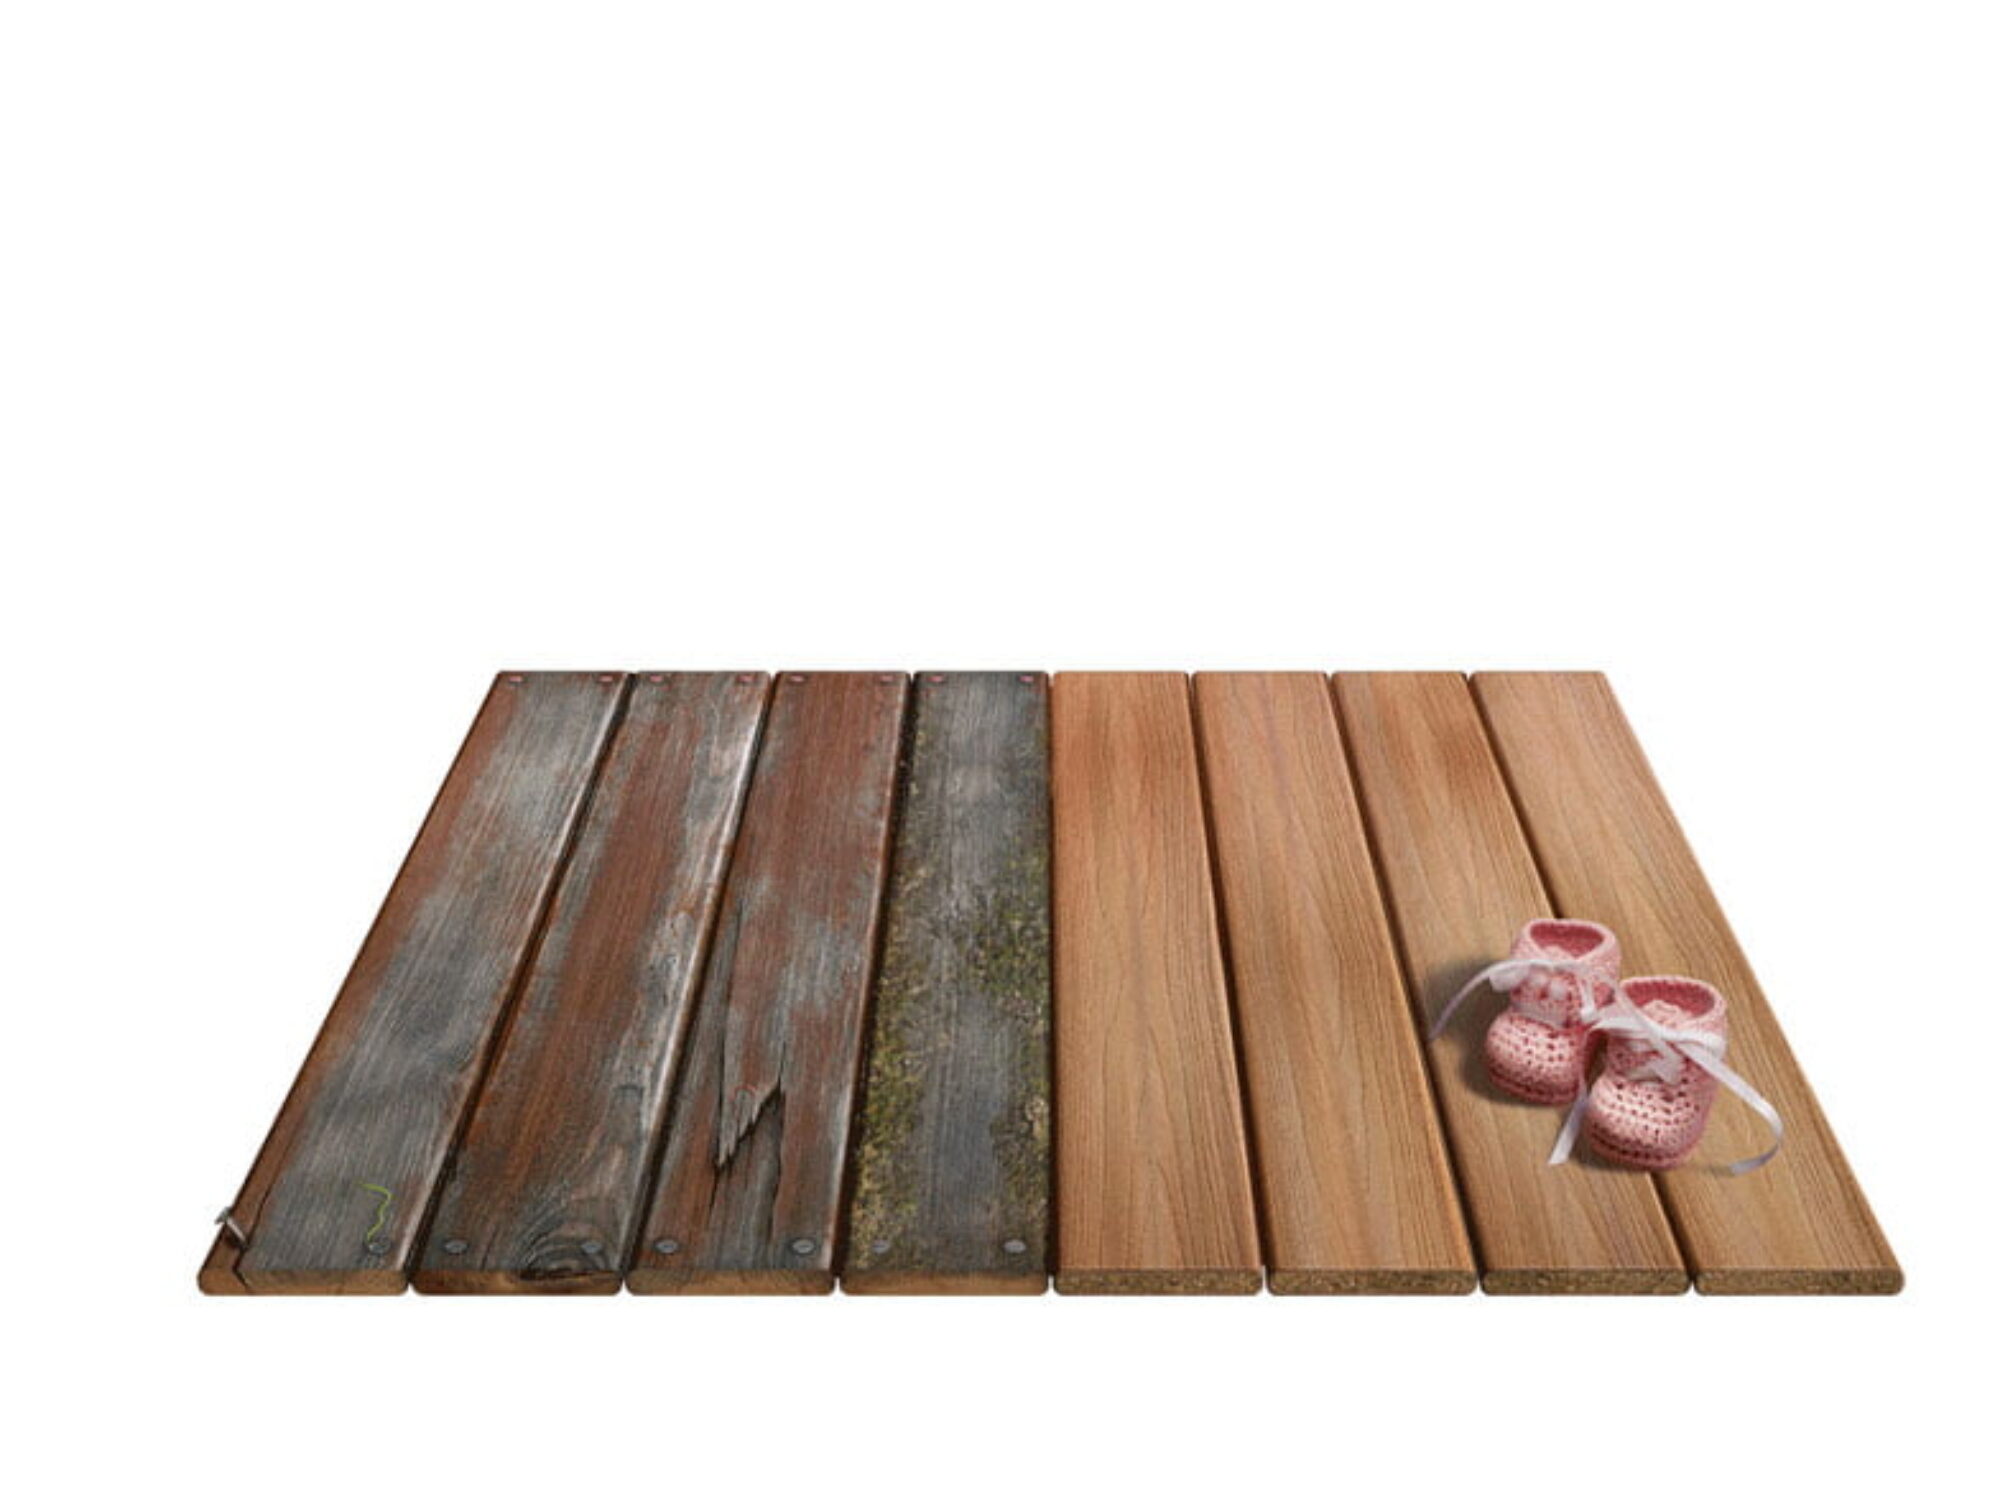 5 Reasons Why Quality Composite Decking Is a Worthy Investment